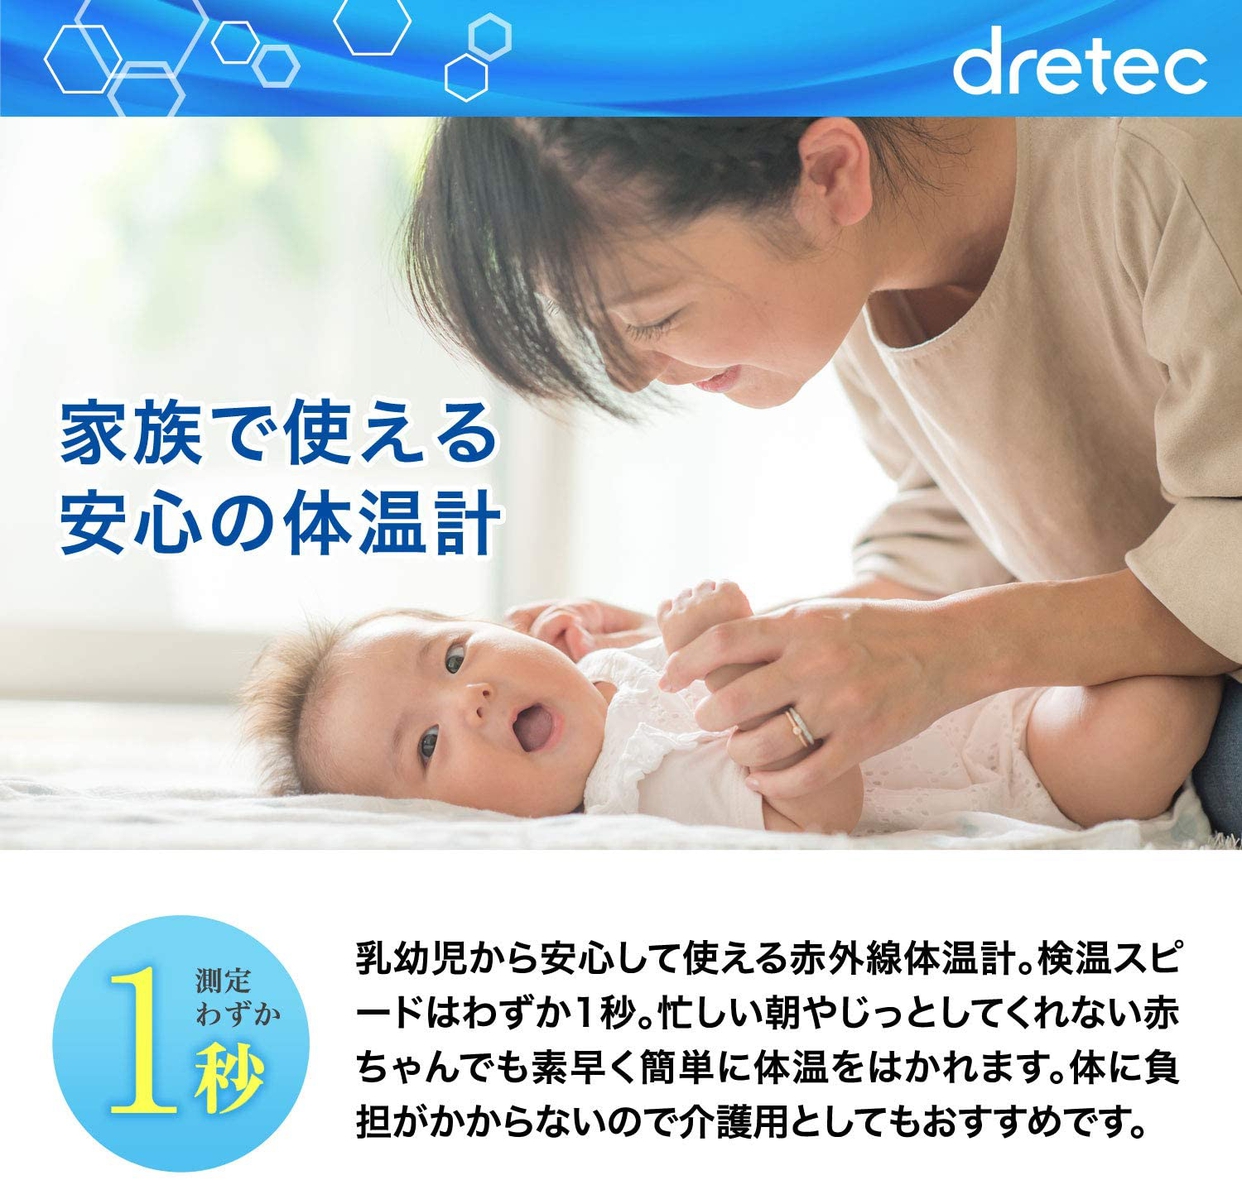 dretec(ドリテック) 非接触体温計 TO-401の商品画像サムネ2 